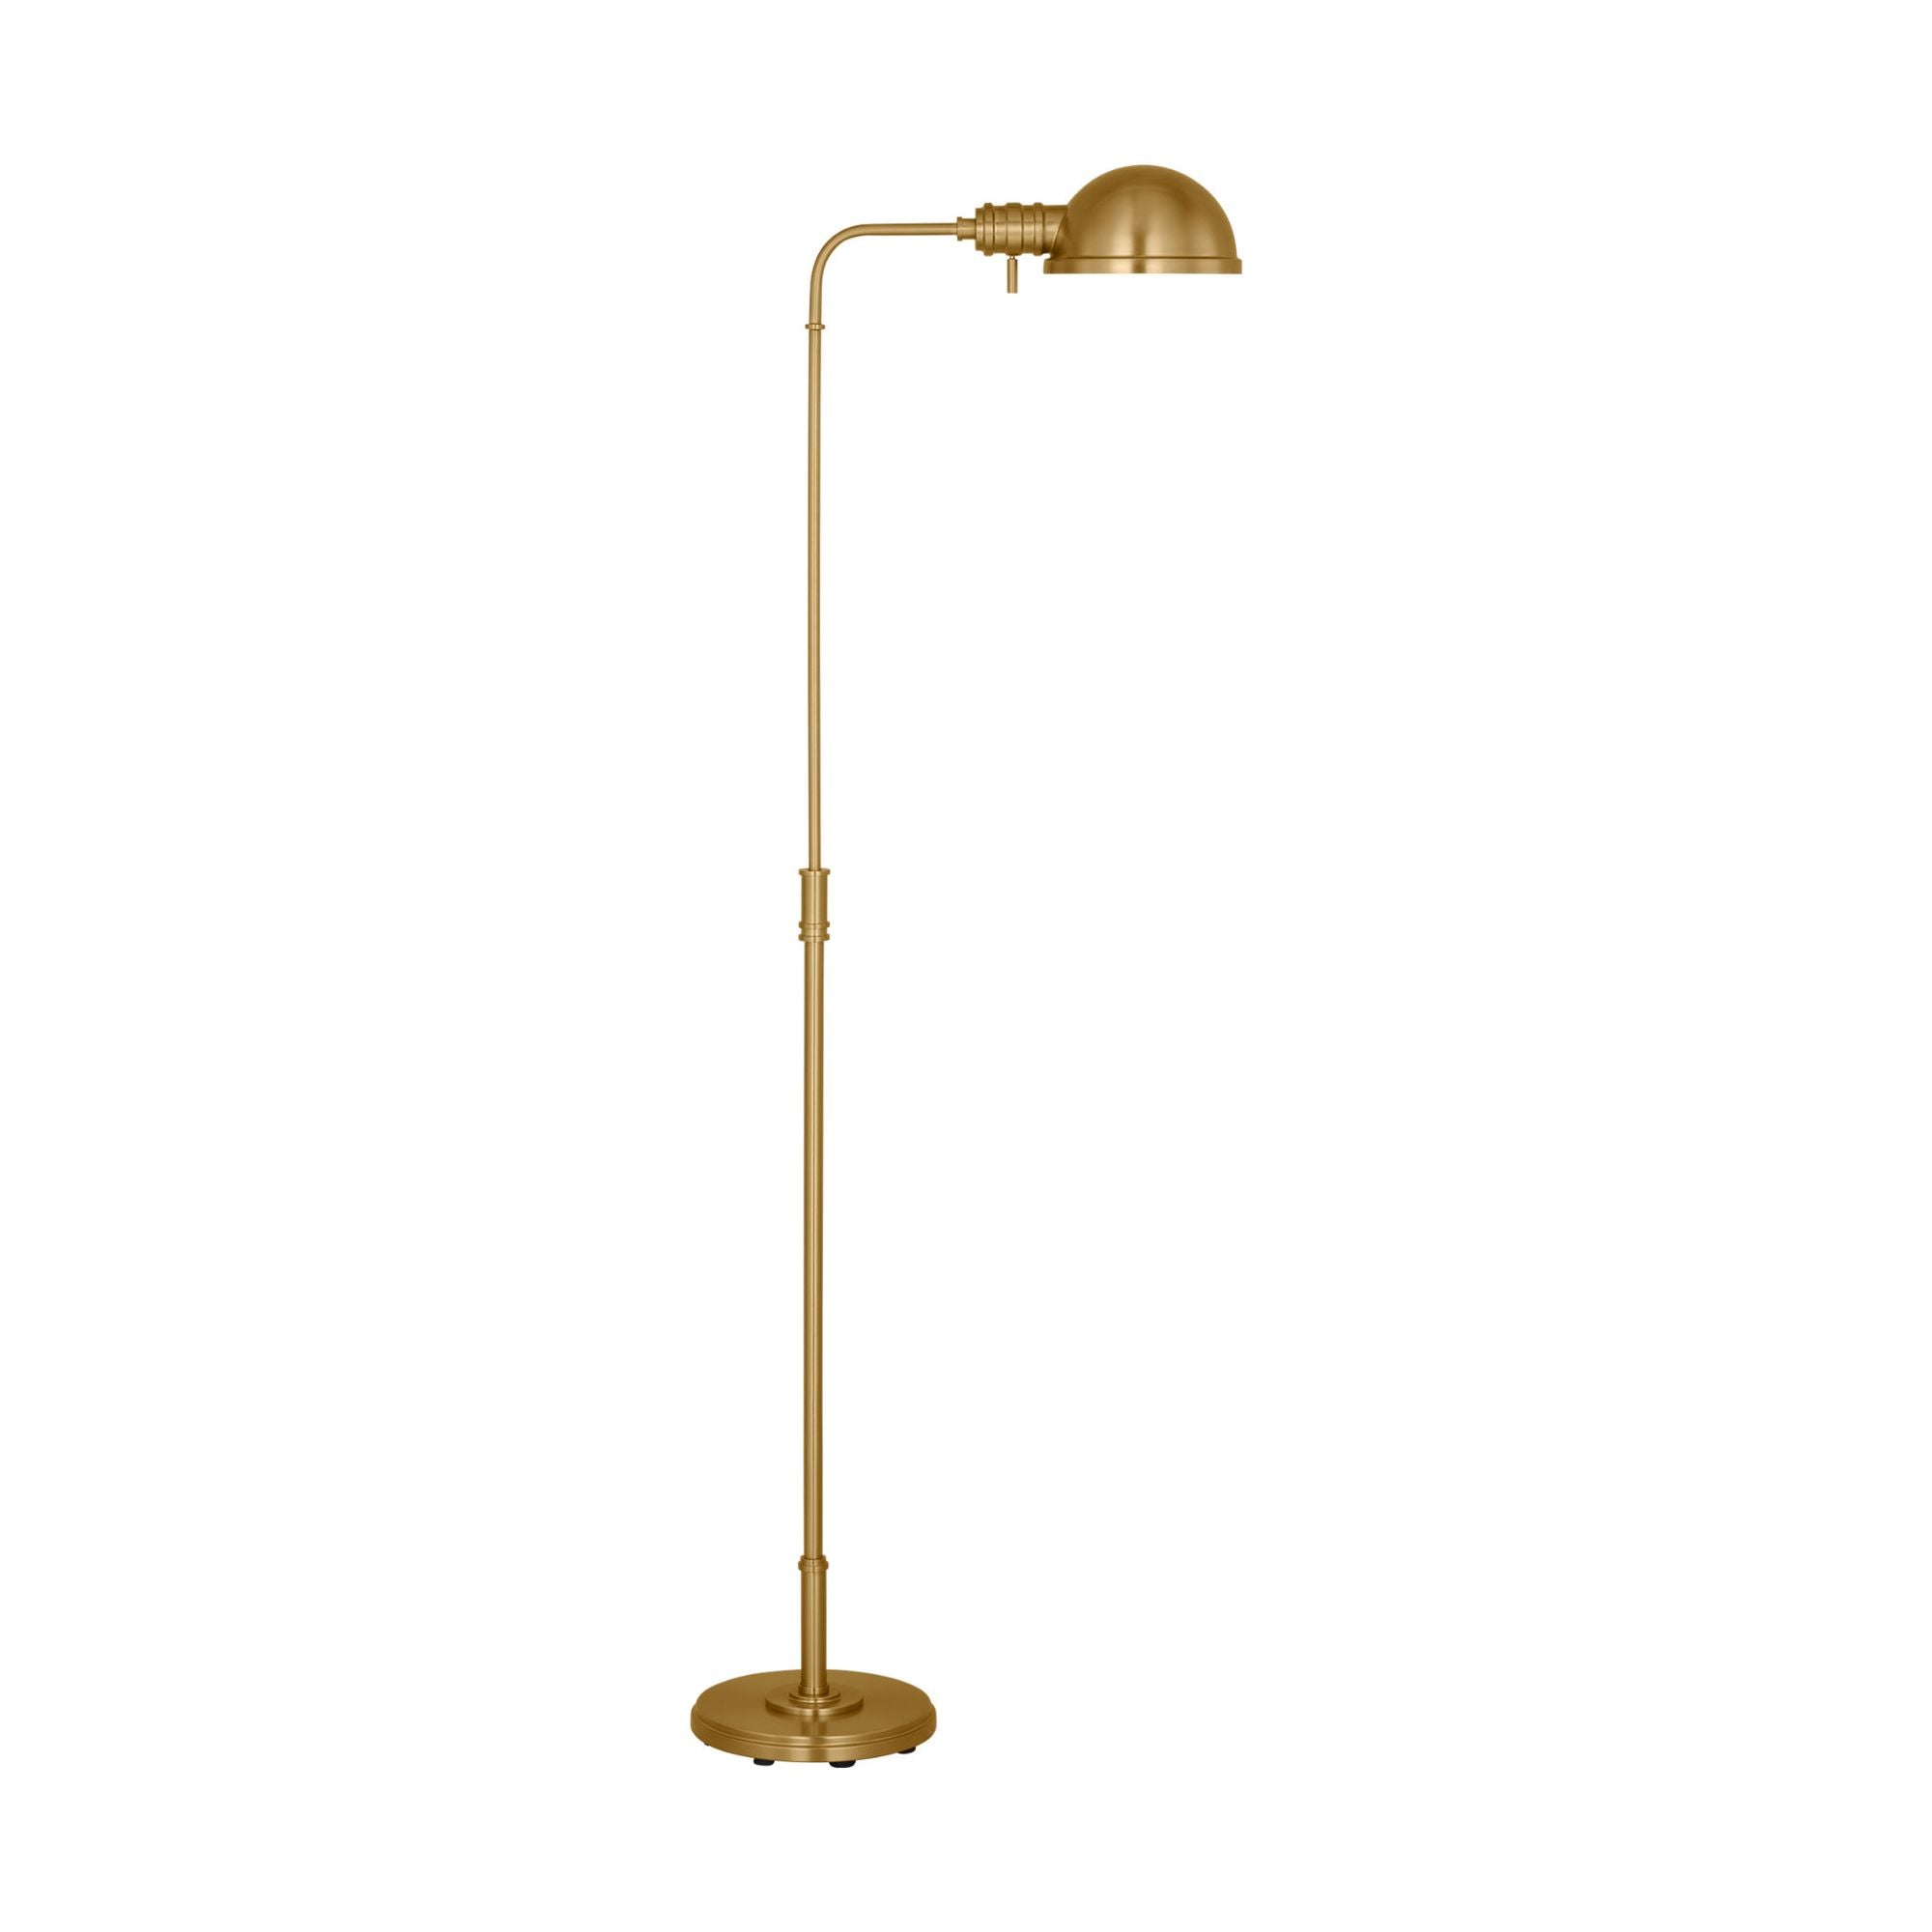 Chapman & Myers Belmont Large Task Floor Lamp in Burnished Brass